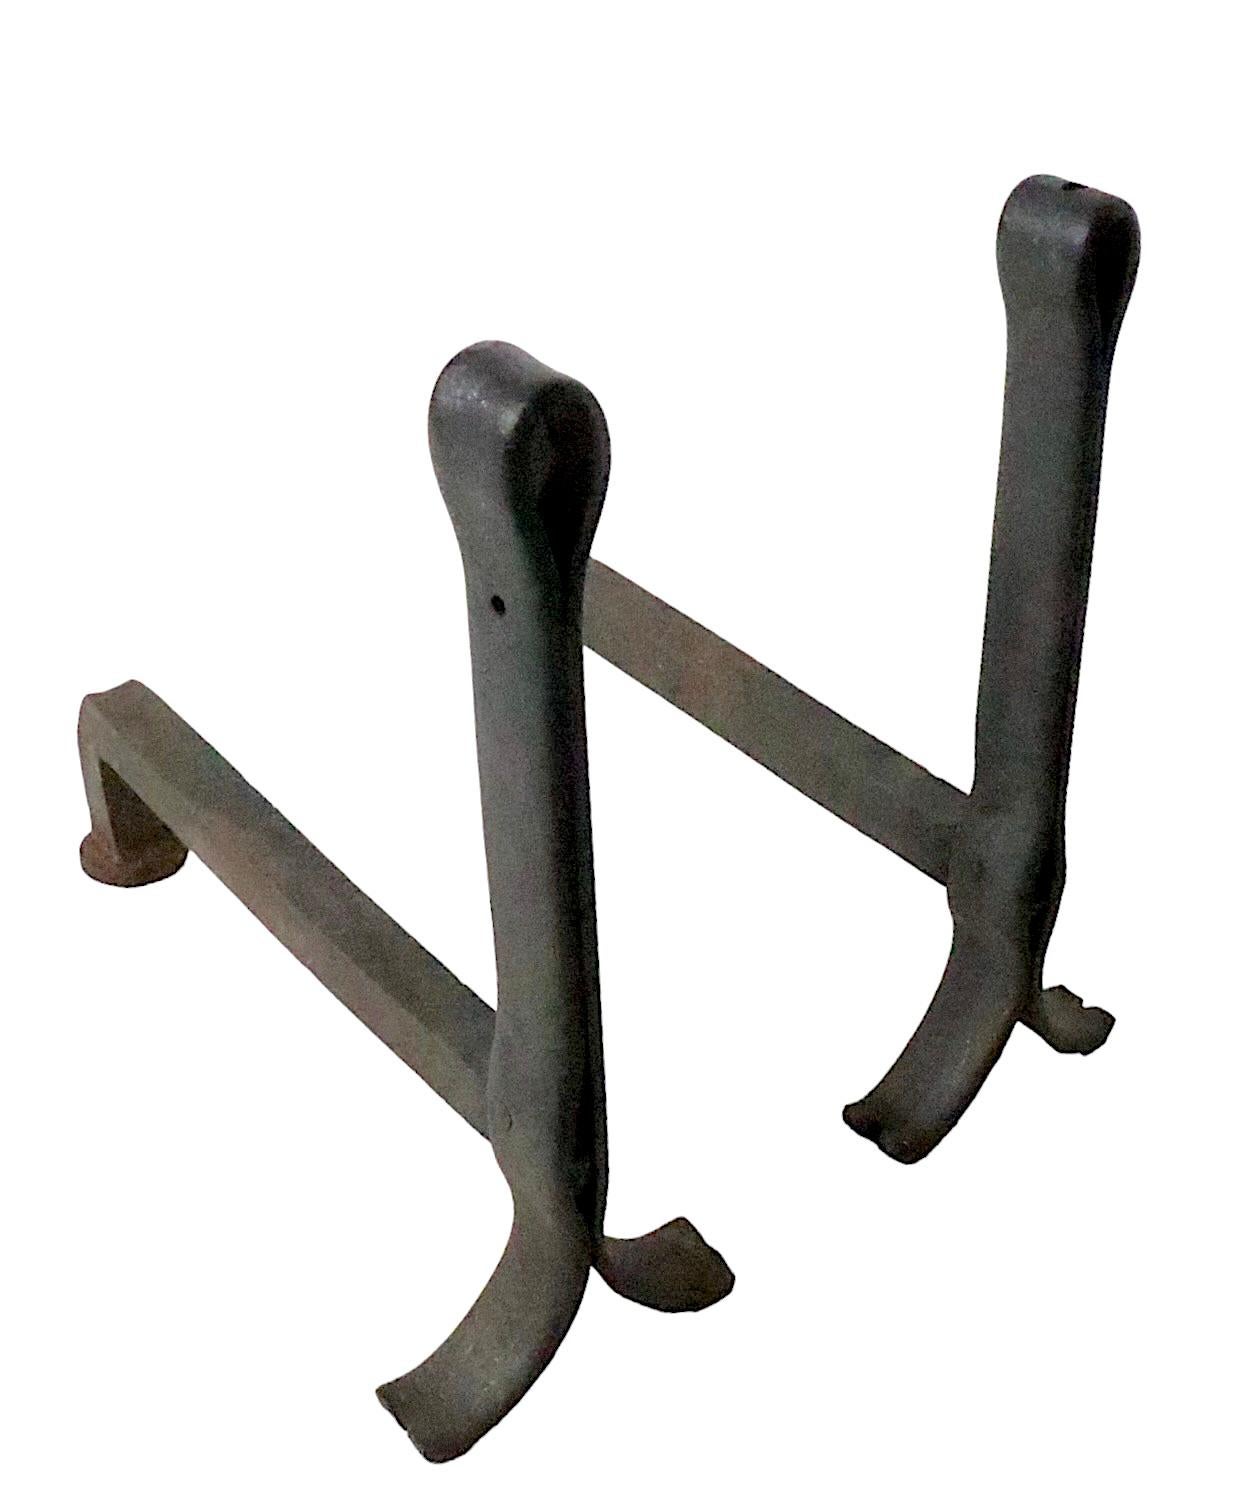 Chic architectural andirons of heavy had forged iron, possibly constructed of old railroad ties.
The pair features a simple loop form top, which creates a spare graphic and modernist look, suitable for both traditional, mid century, and